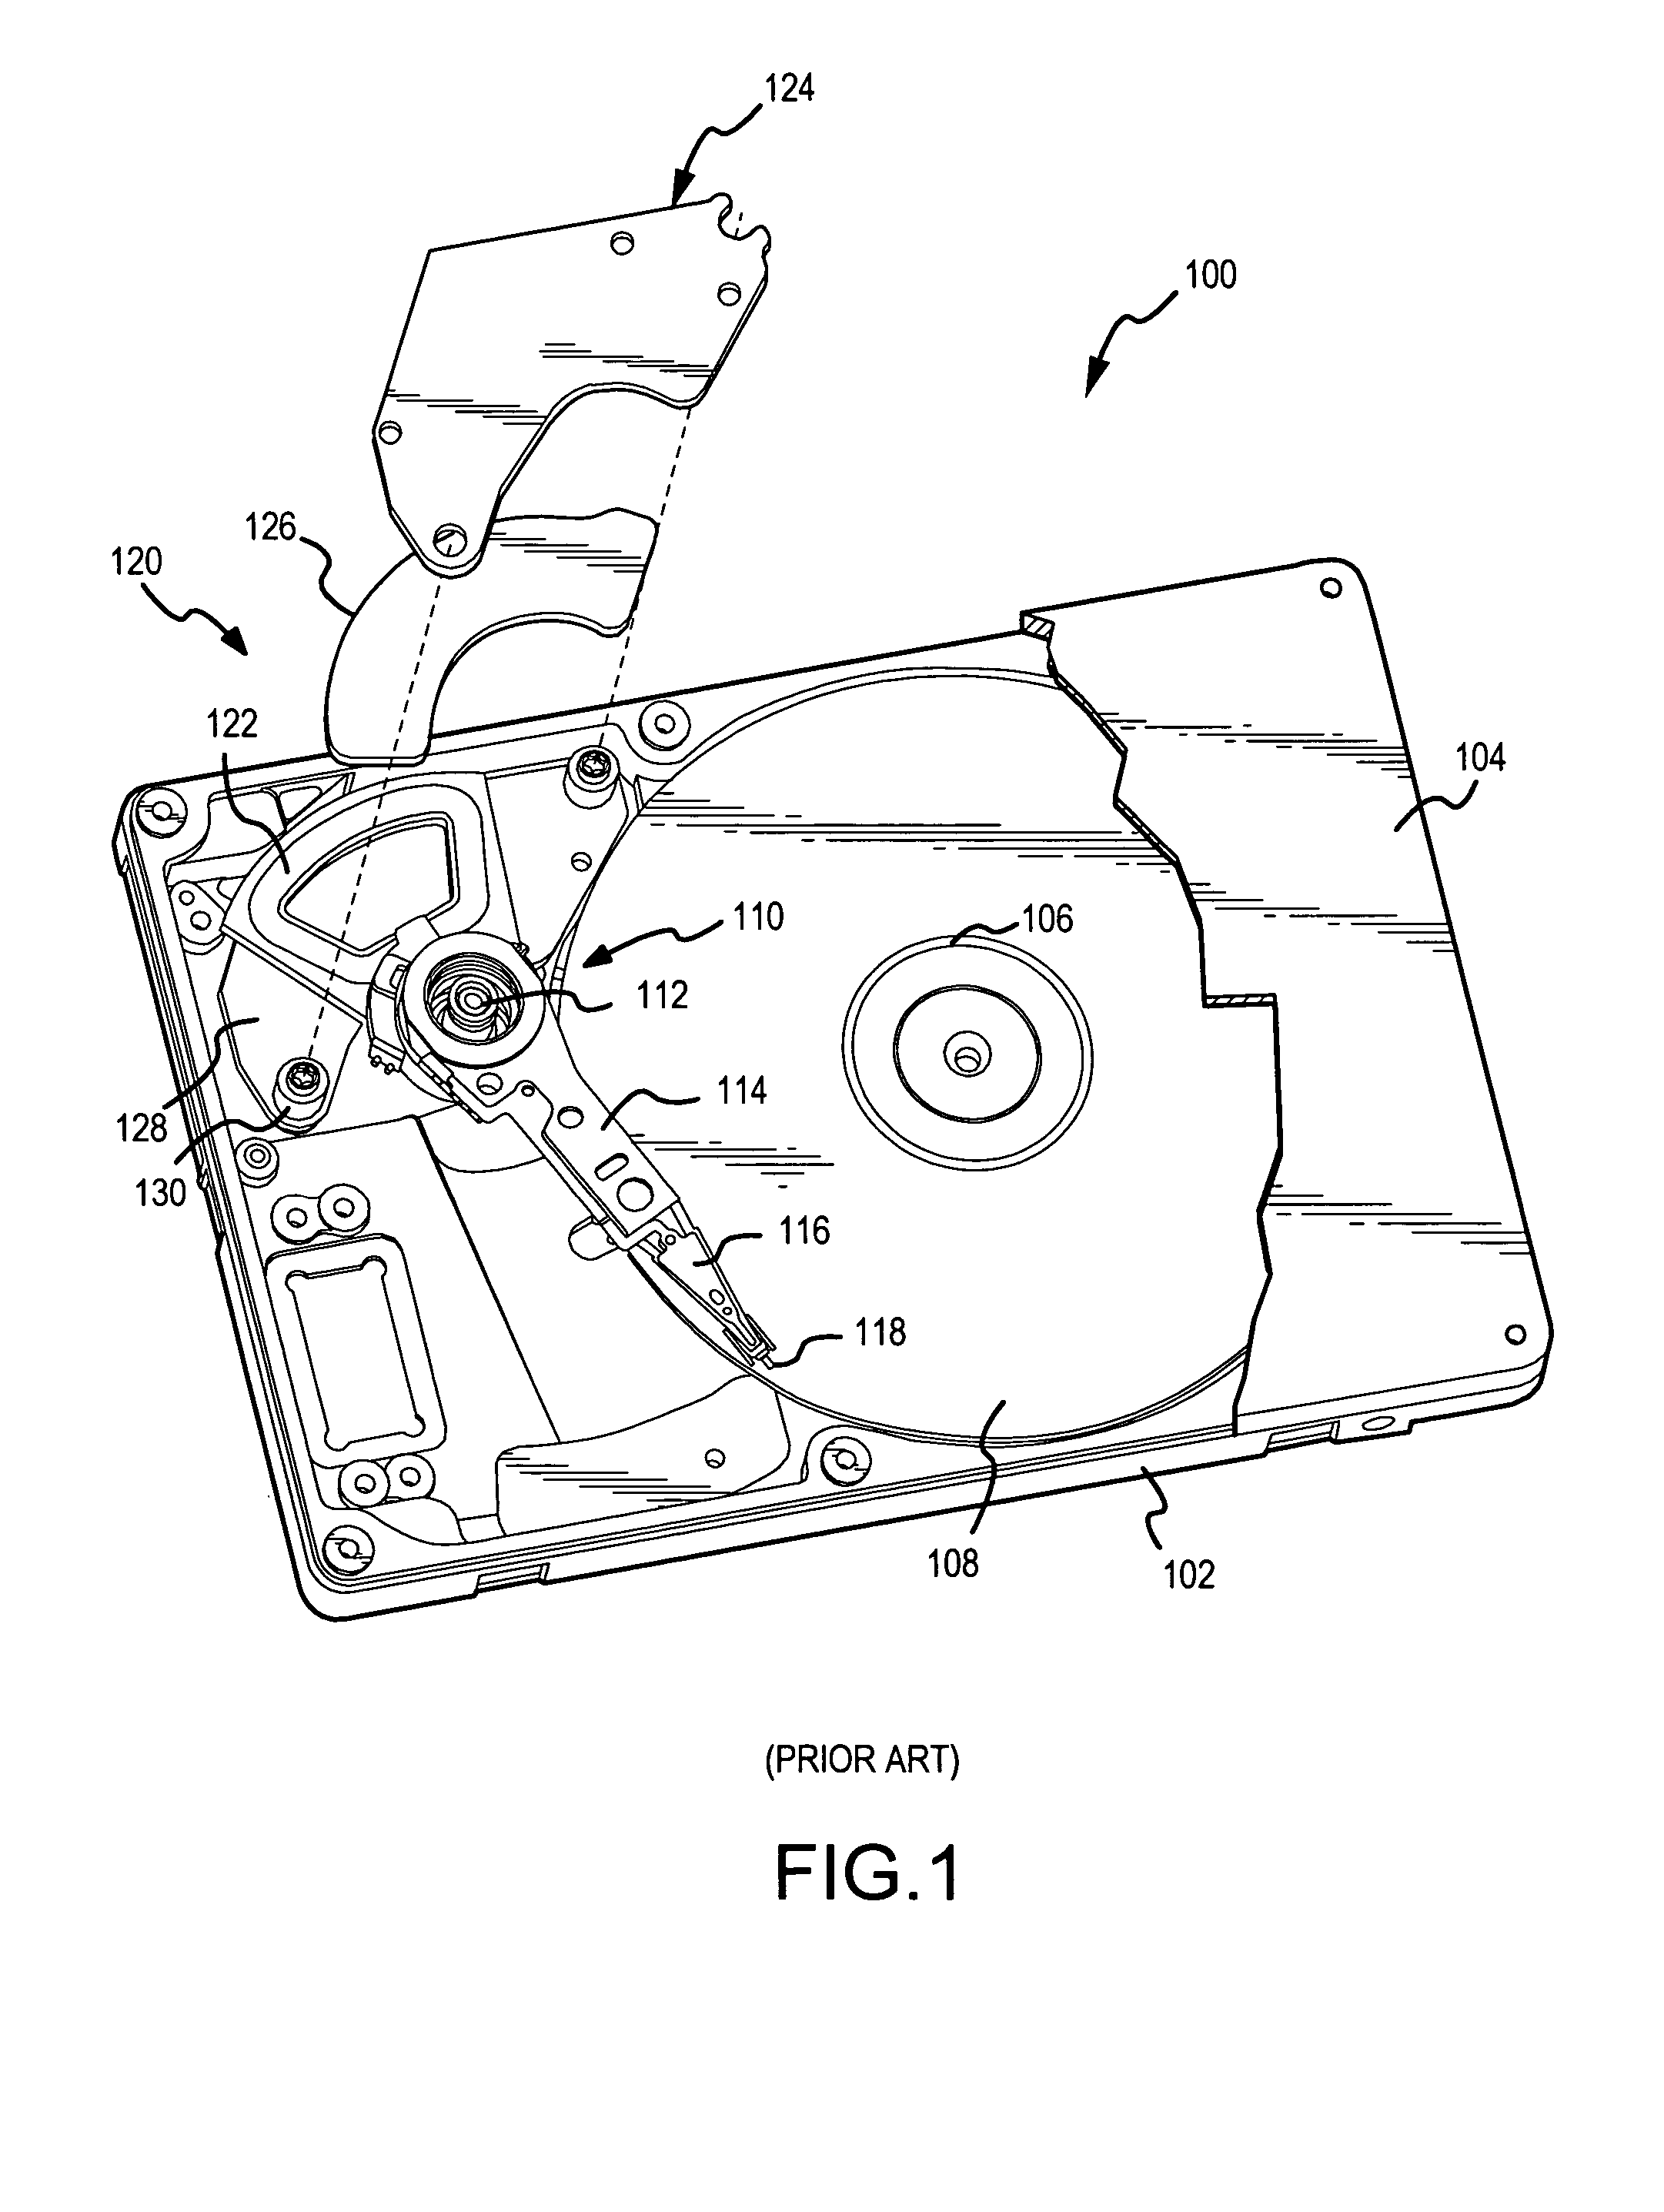 Method for making a data storage device